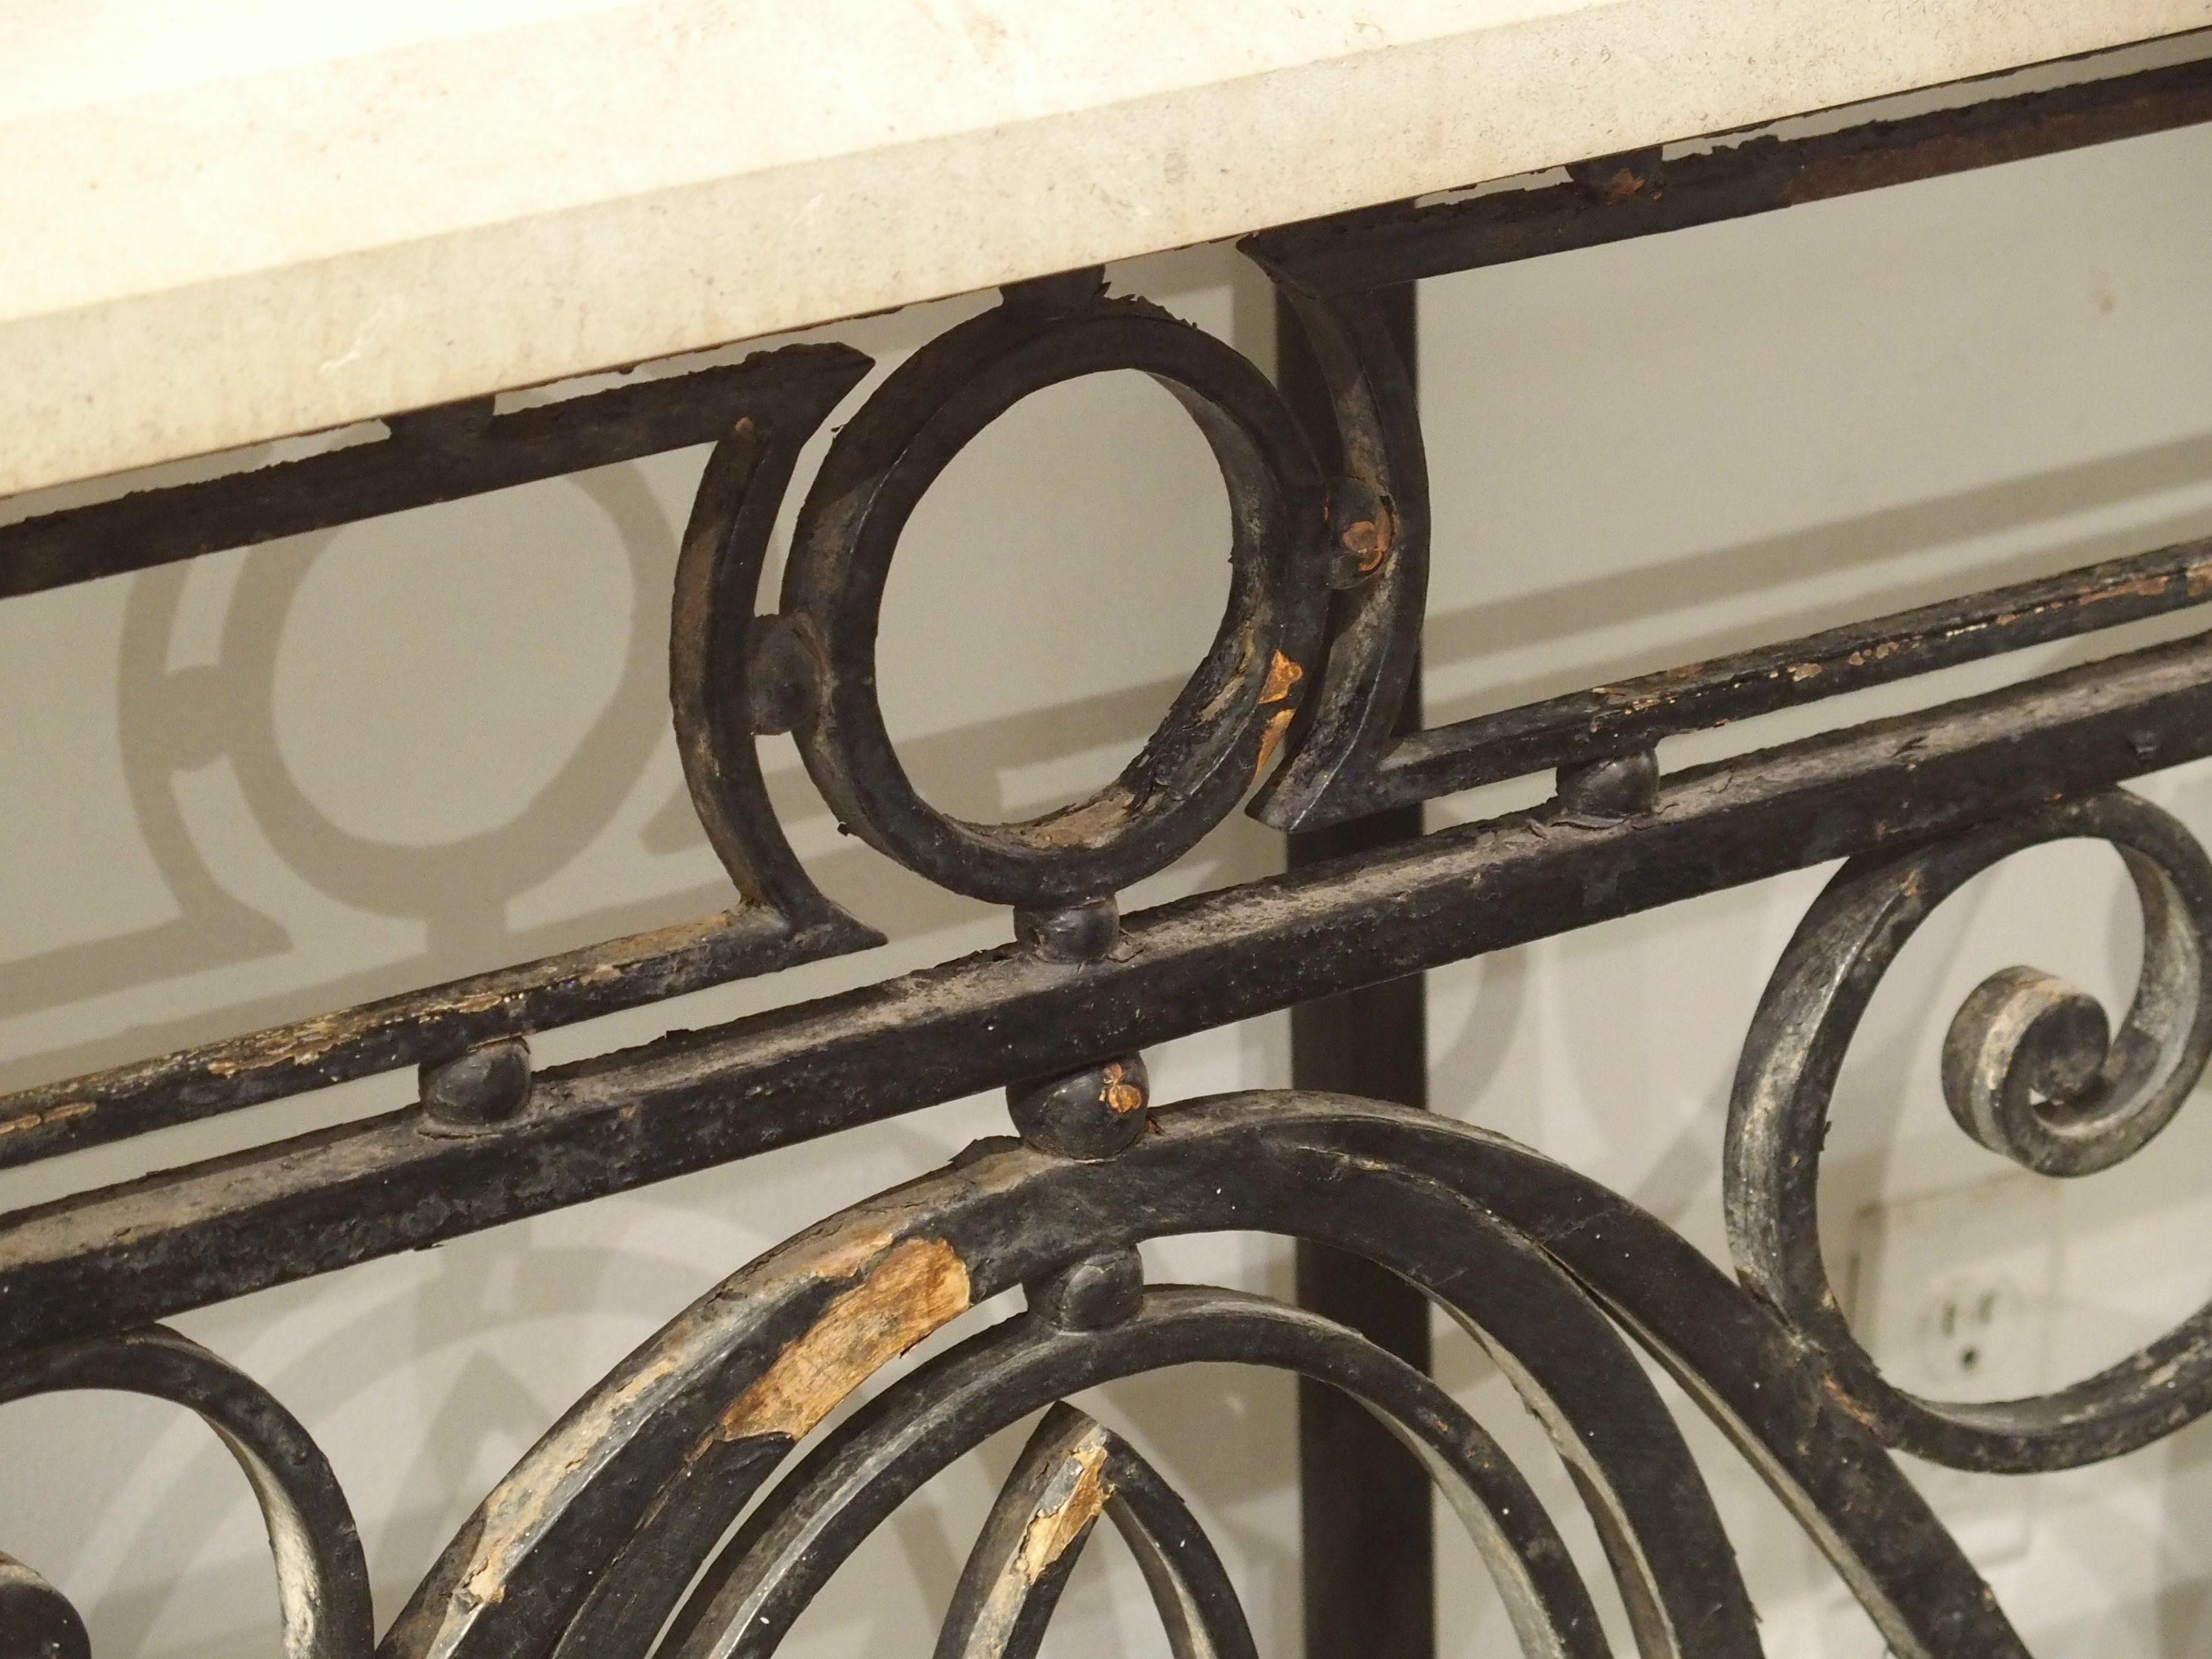 Originally serving as a balcony barrier on a French-style building in Argentina, this wrought iron railing was produced circa 1900. We have repurposed the iron into a console table with a beveled limestone top. At over two inches thick, the hand-cut